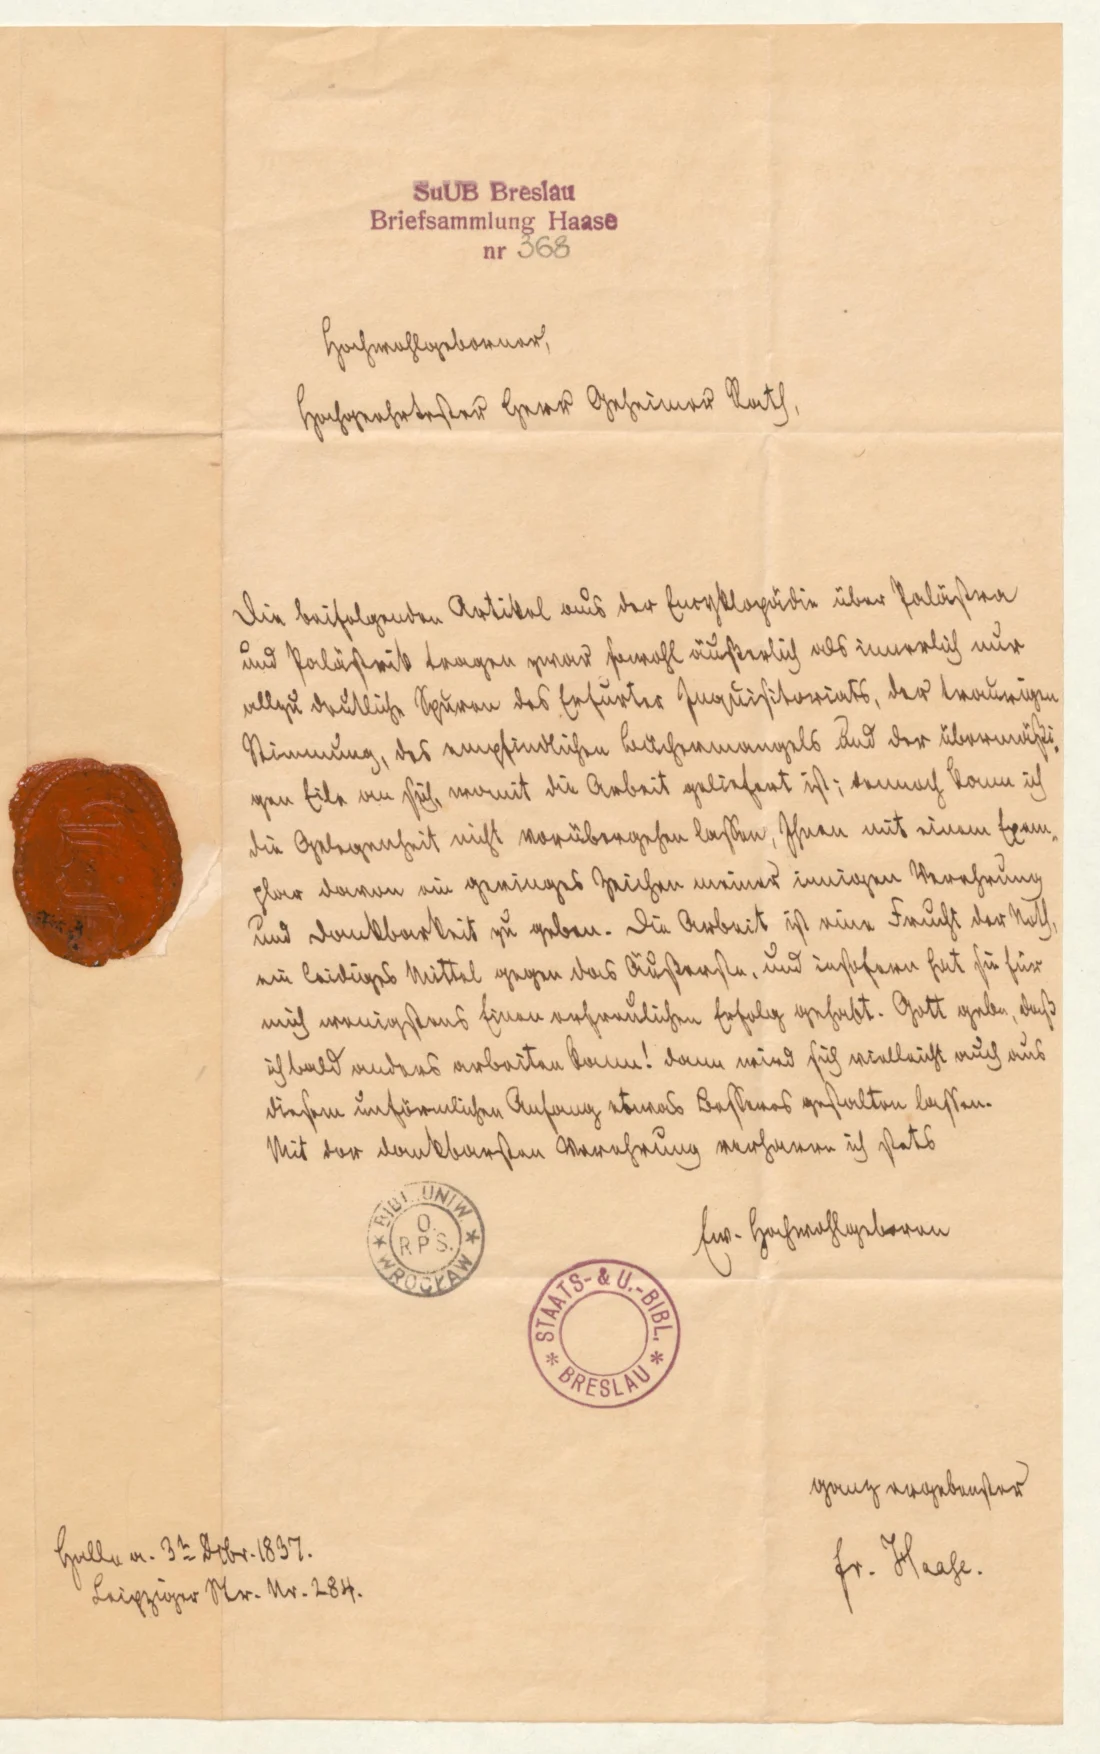 scan of a hand-written letter with a red wax seal